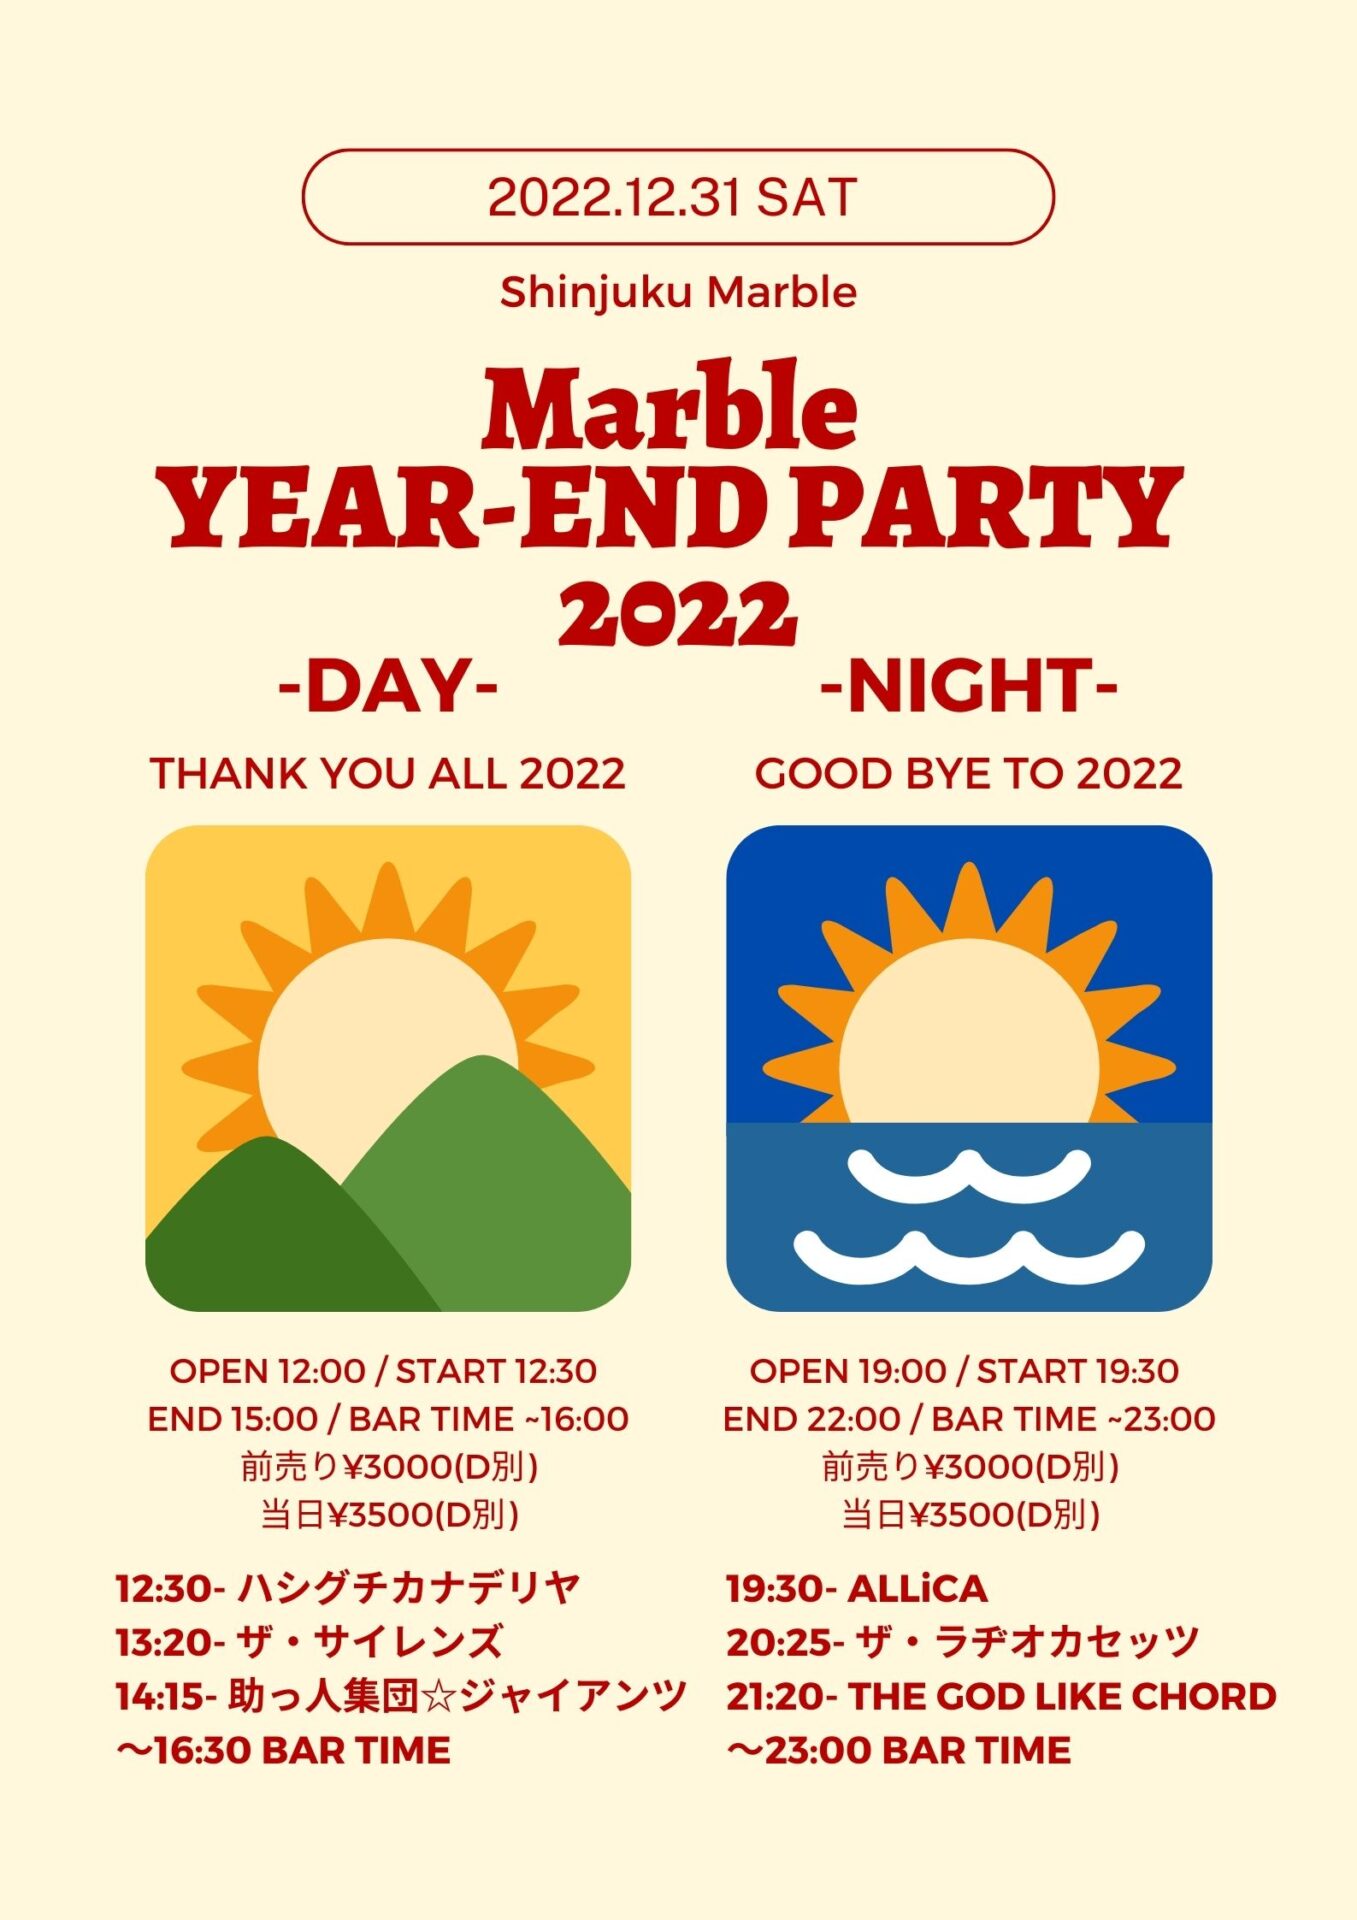 Marble YEAR-END PARTY 2022 -DAY-「THANK YOU ALL 2022」